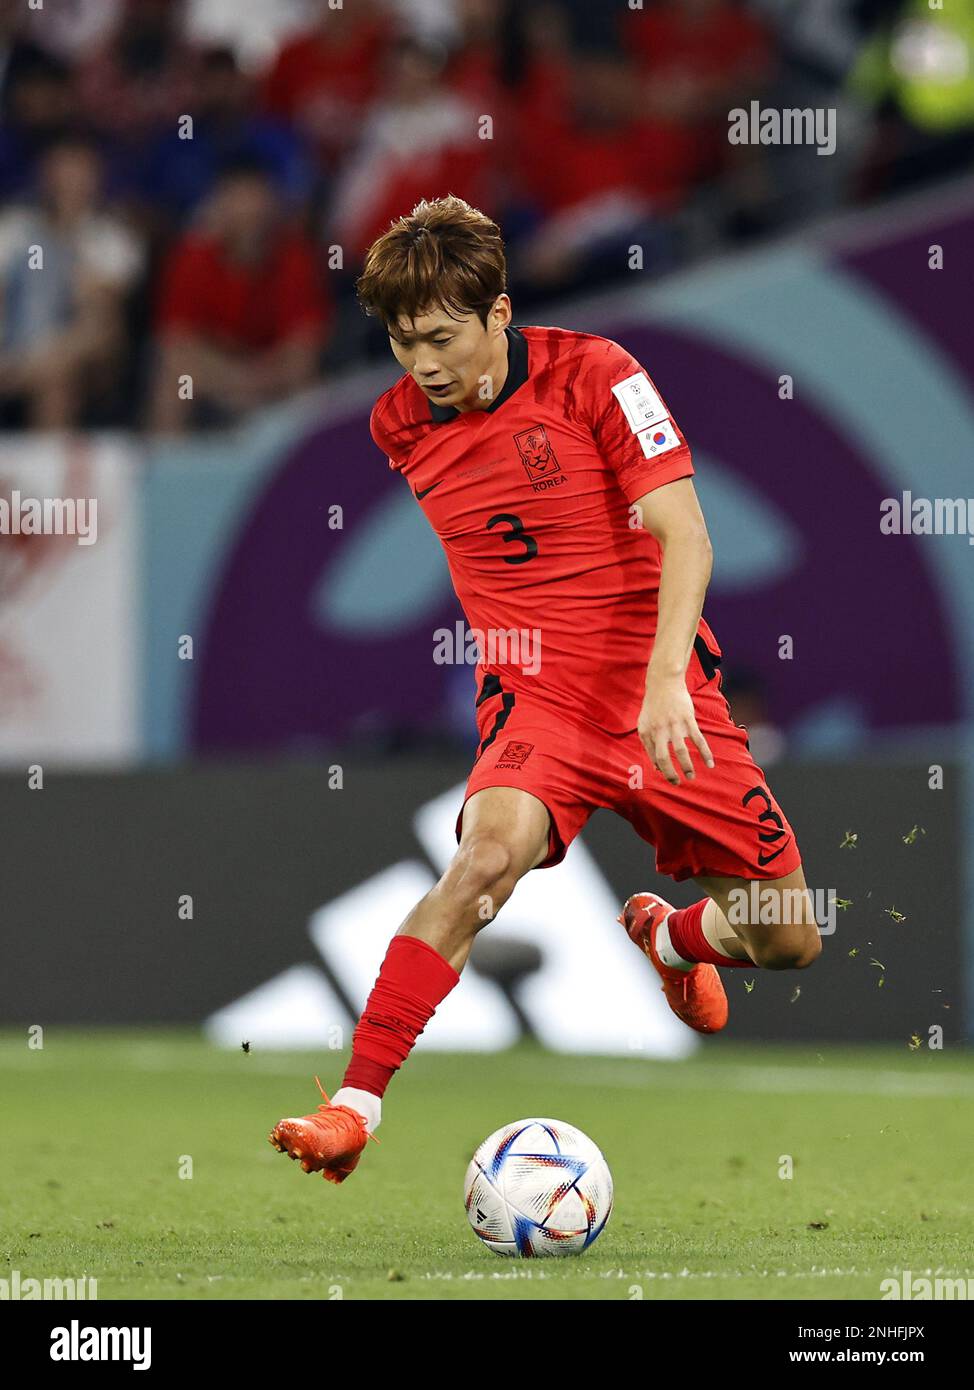 DOHA - Jin-Su Kim of Korea Republic during the FIFA World Cup Qatar 2022 group H match between South Korea and Portugal at Education City Stadium on December 2, 2022 in Doha, Qatar. AP | Dutch Height | MAURICE OF STONE Stock Photo